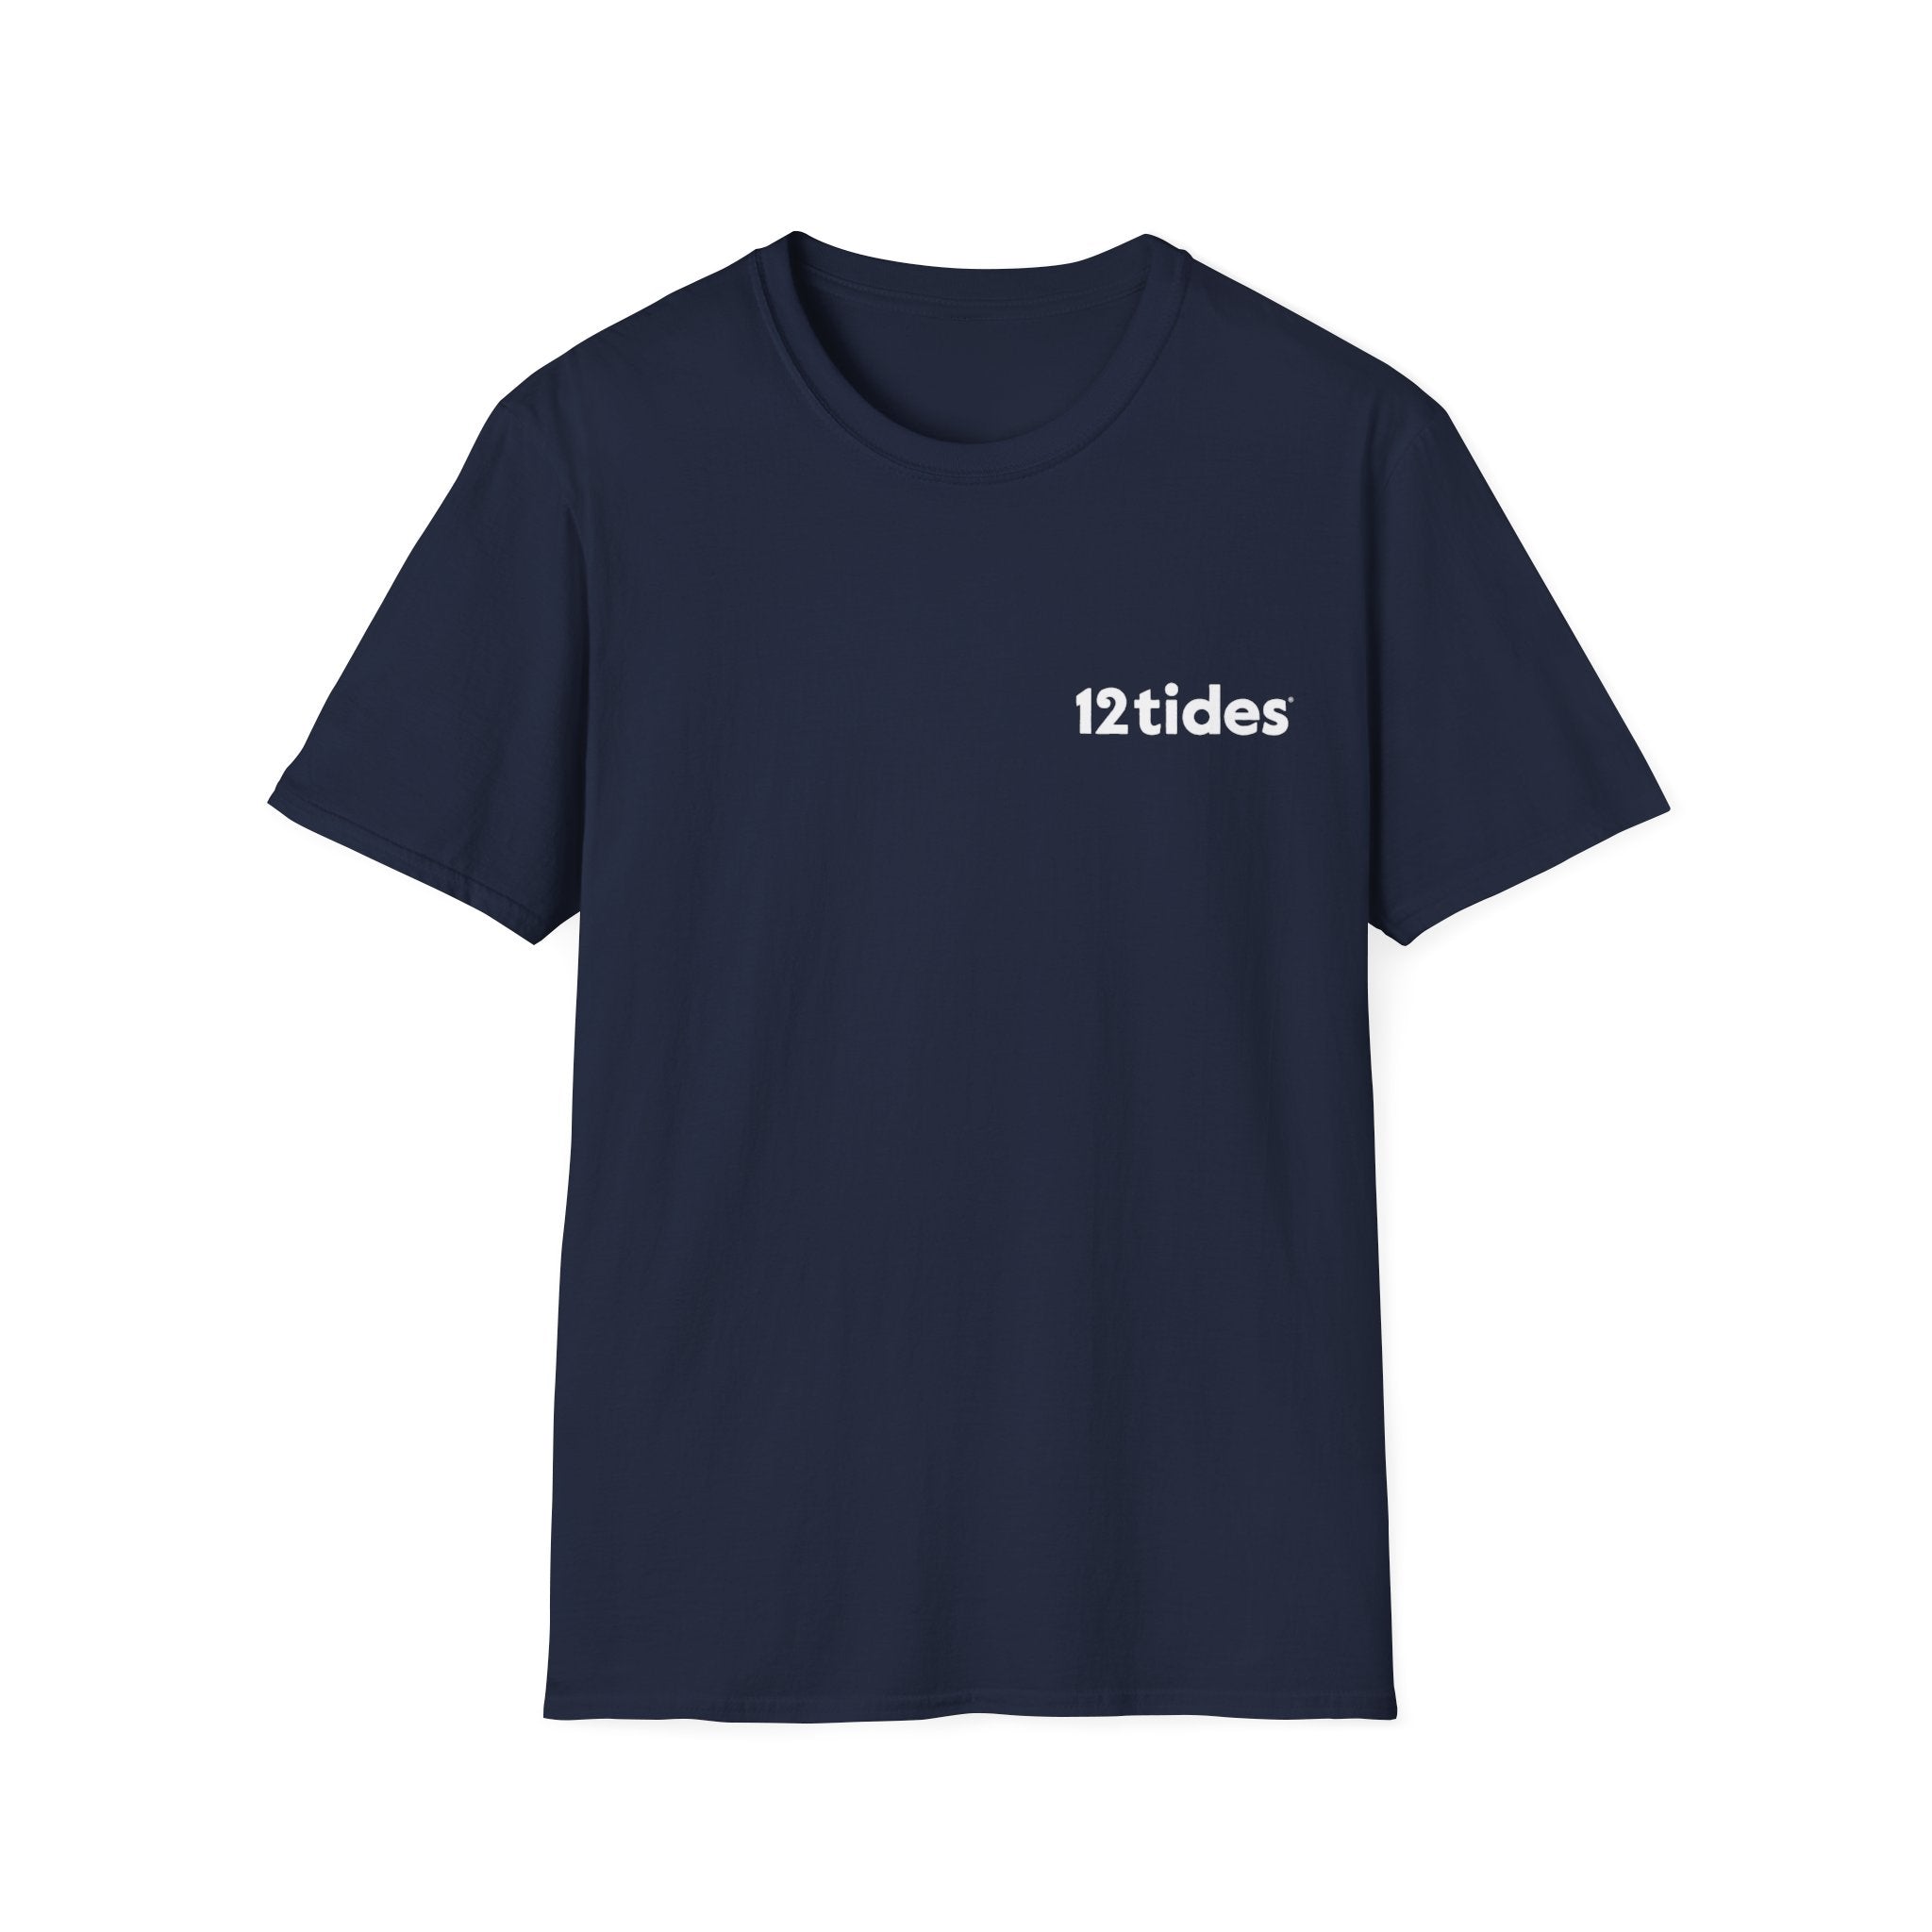 12 Tides 'Kelpin' our oceans' tee